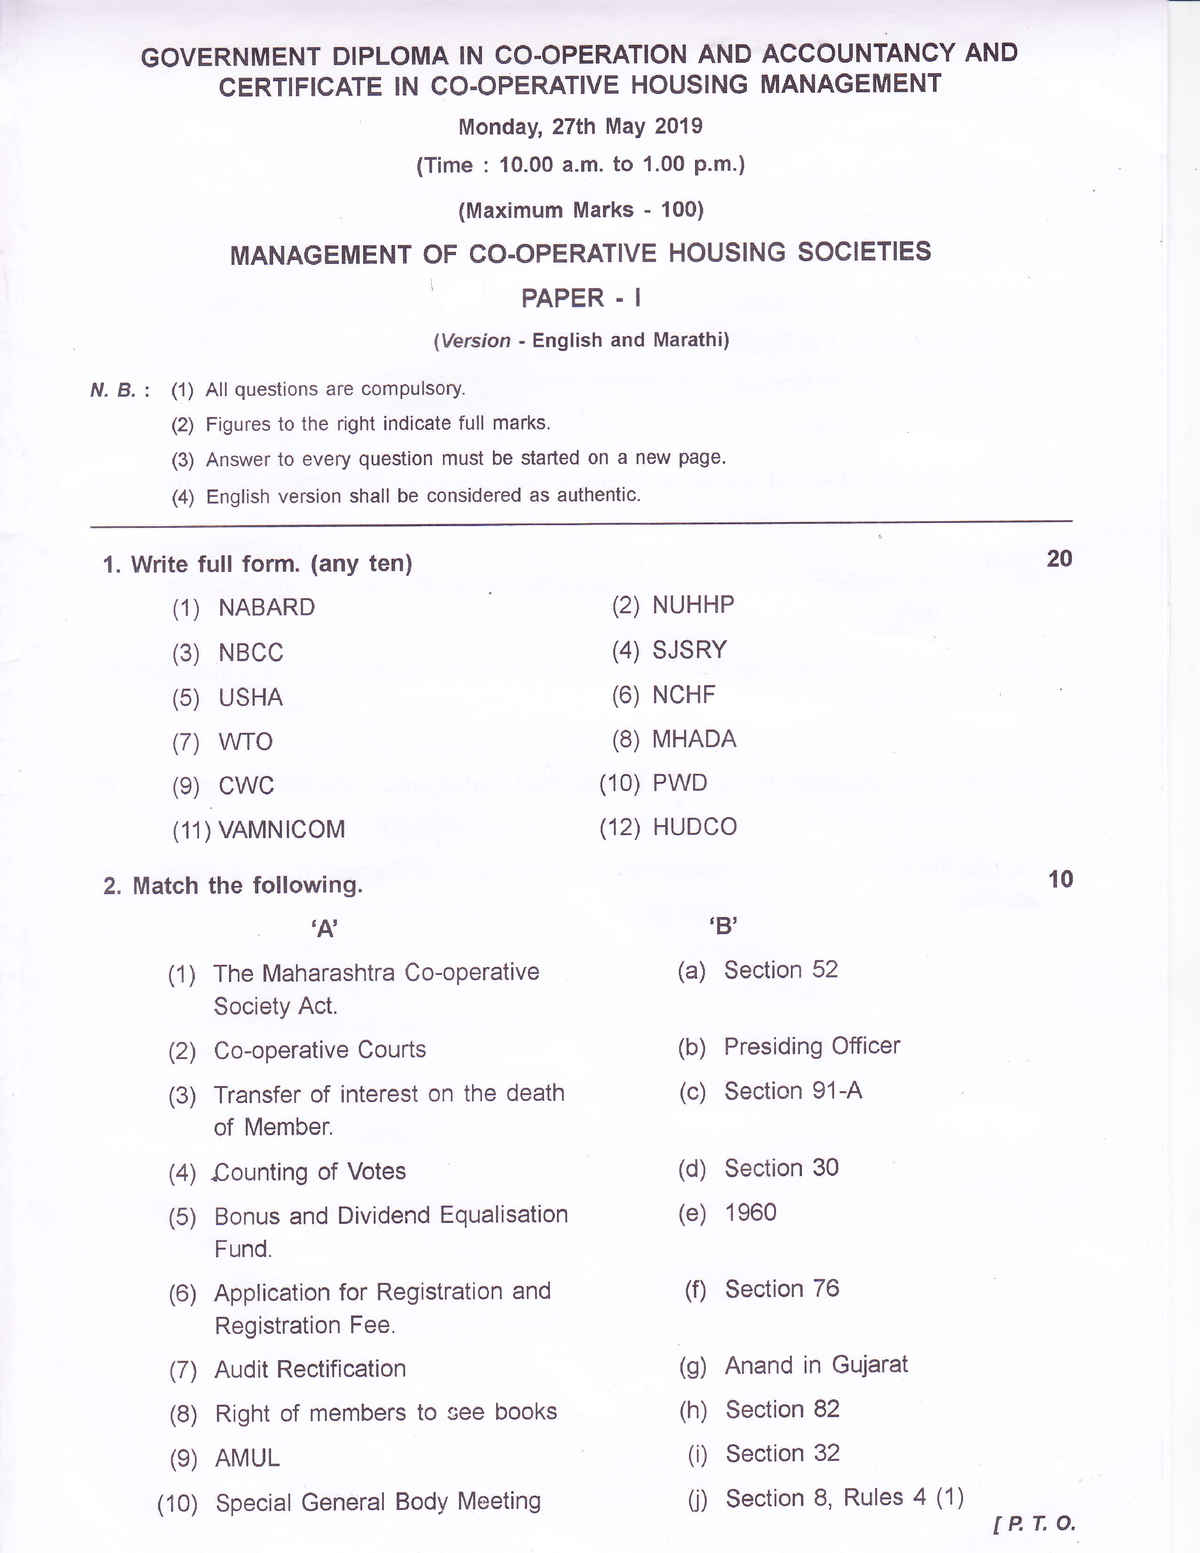 Question Paper I GDCA EXAM GOVERNMENT DIPLOMA IN COOPERATION AND